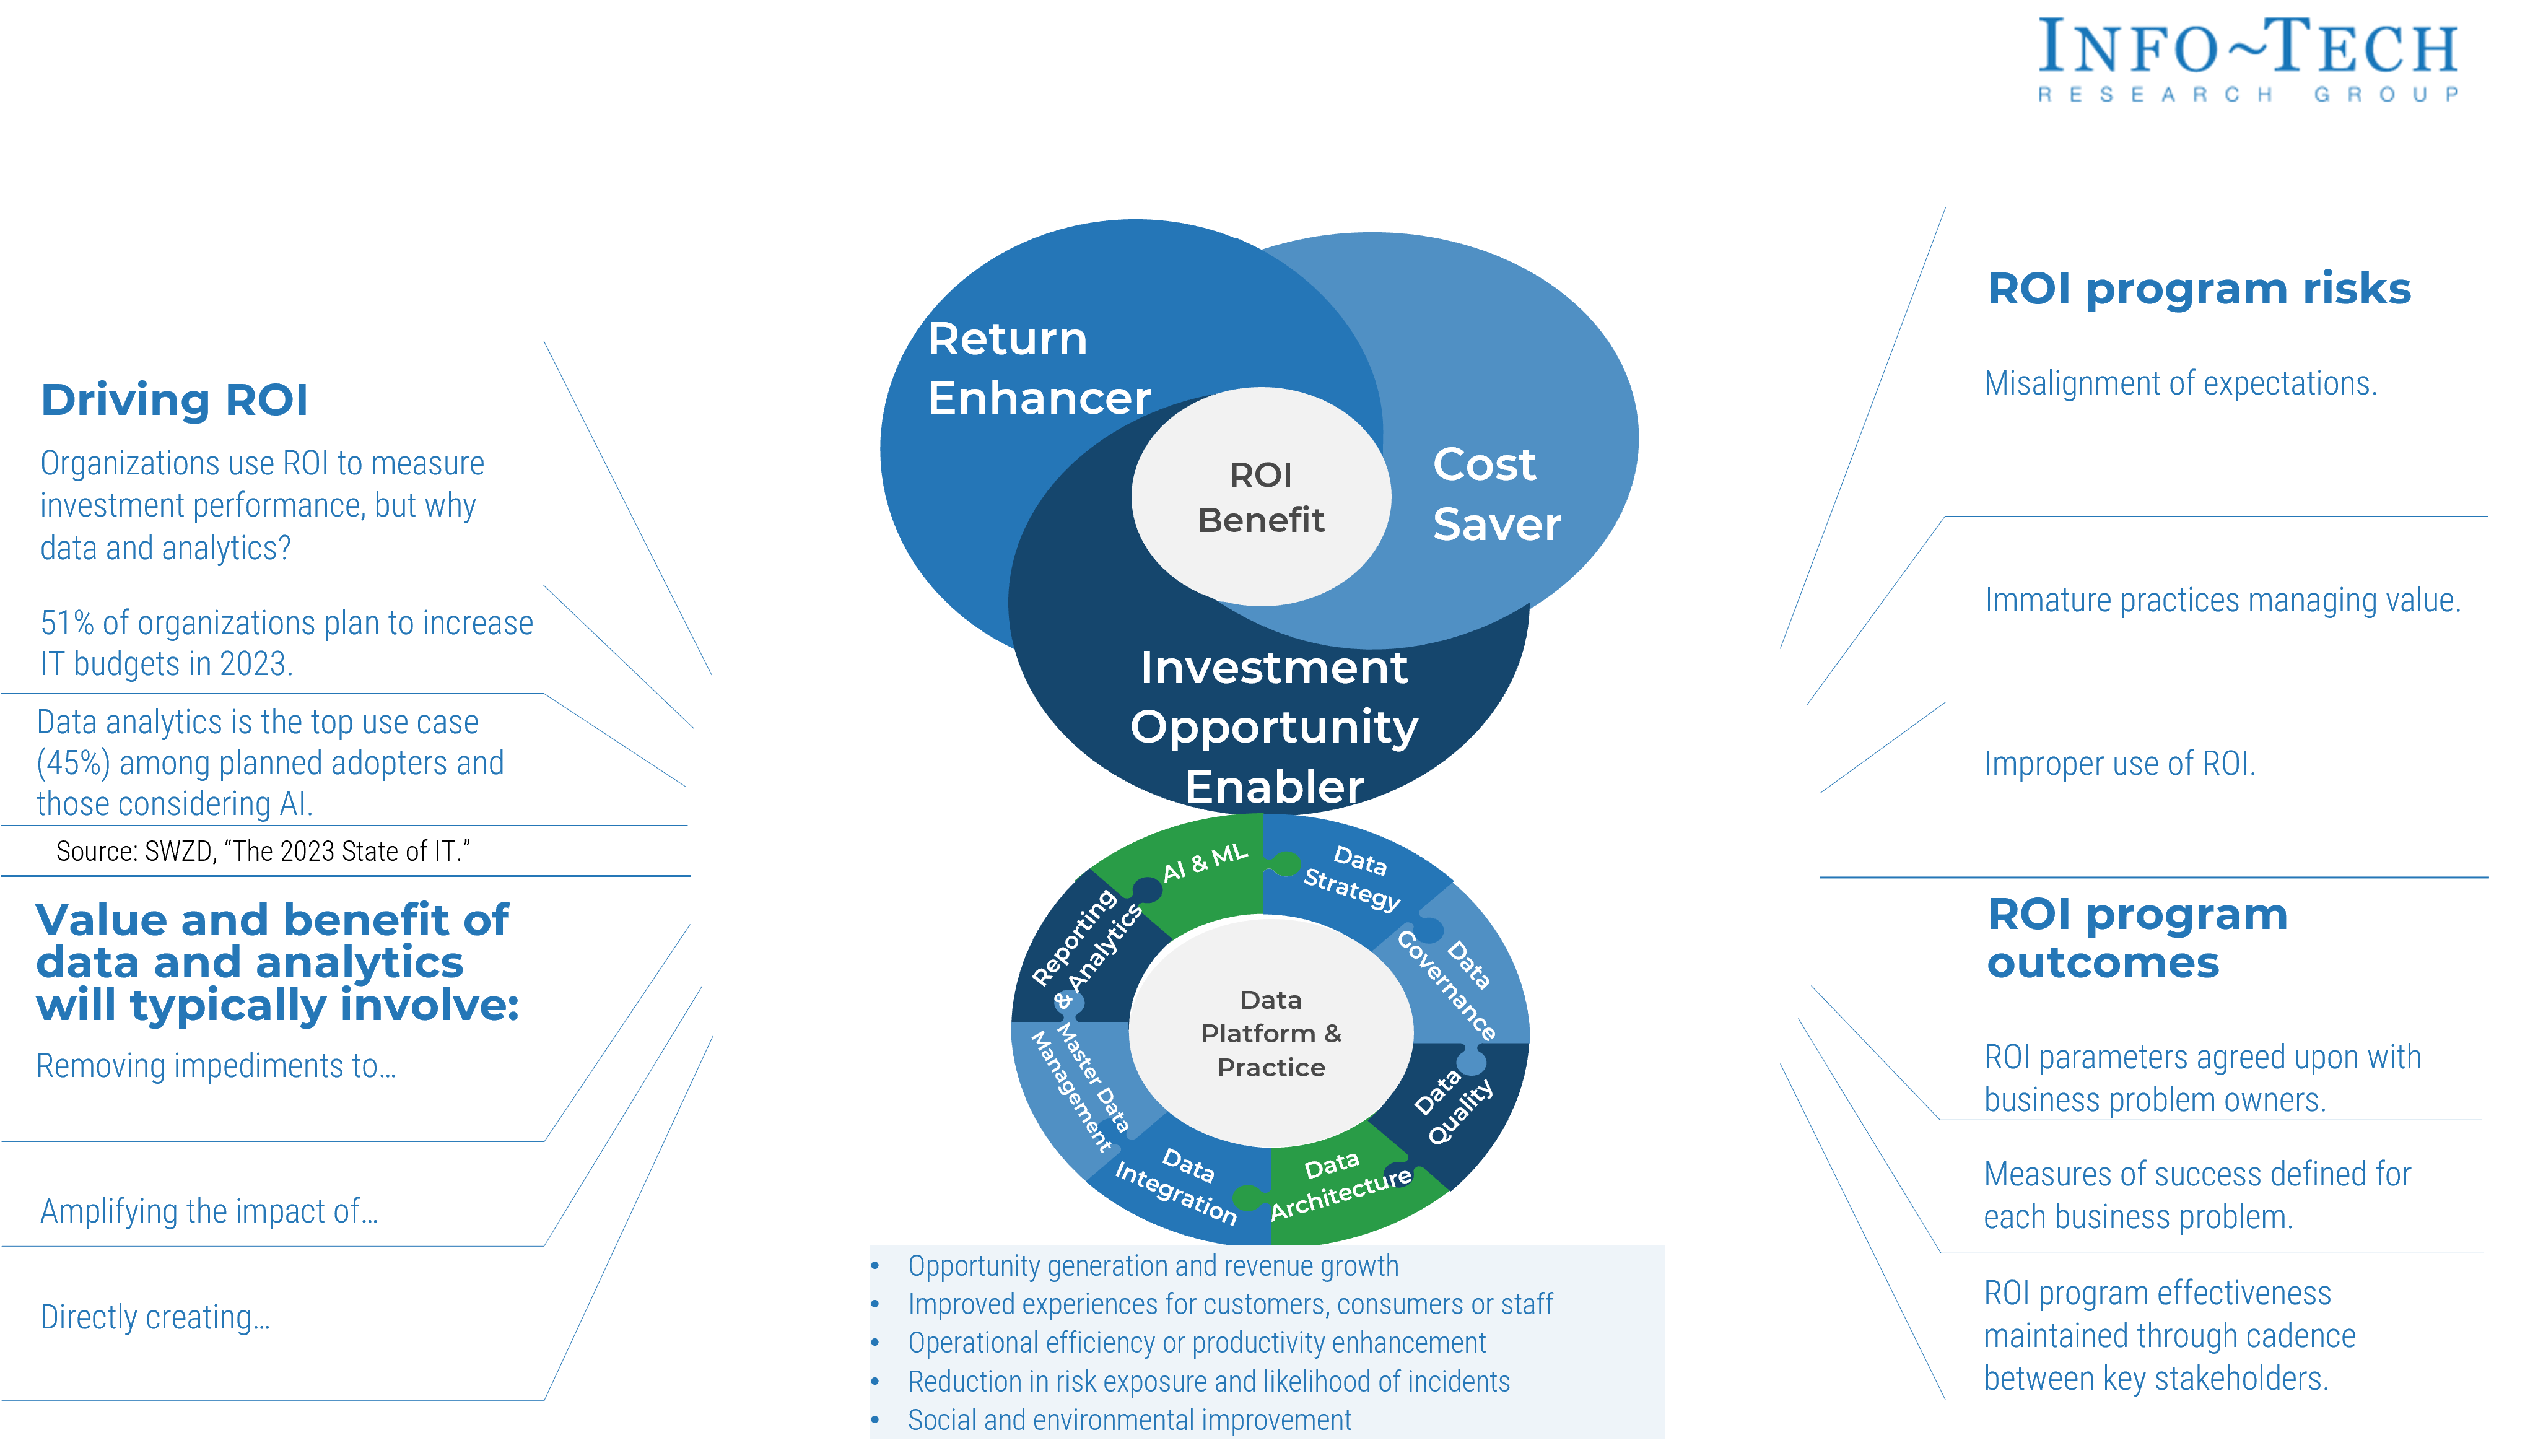 The image contains a screenshot of a diagram that demonstrates the ROI strategy on data and analytics.